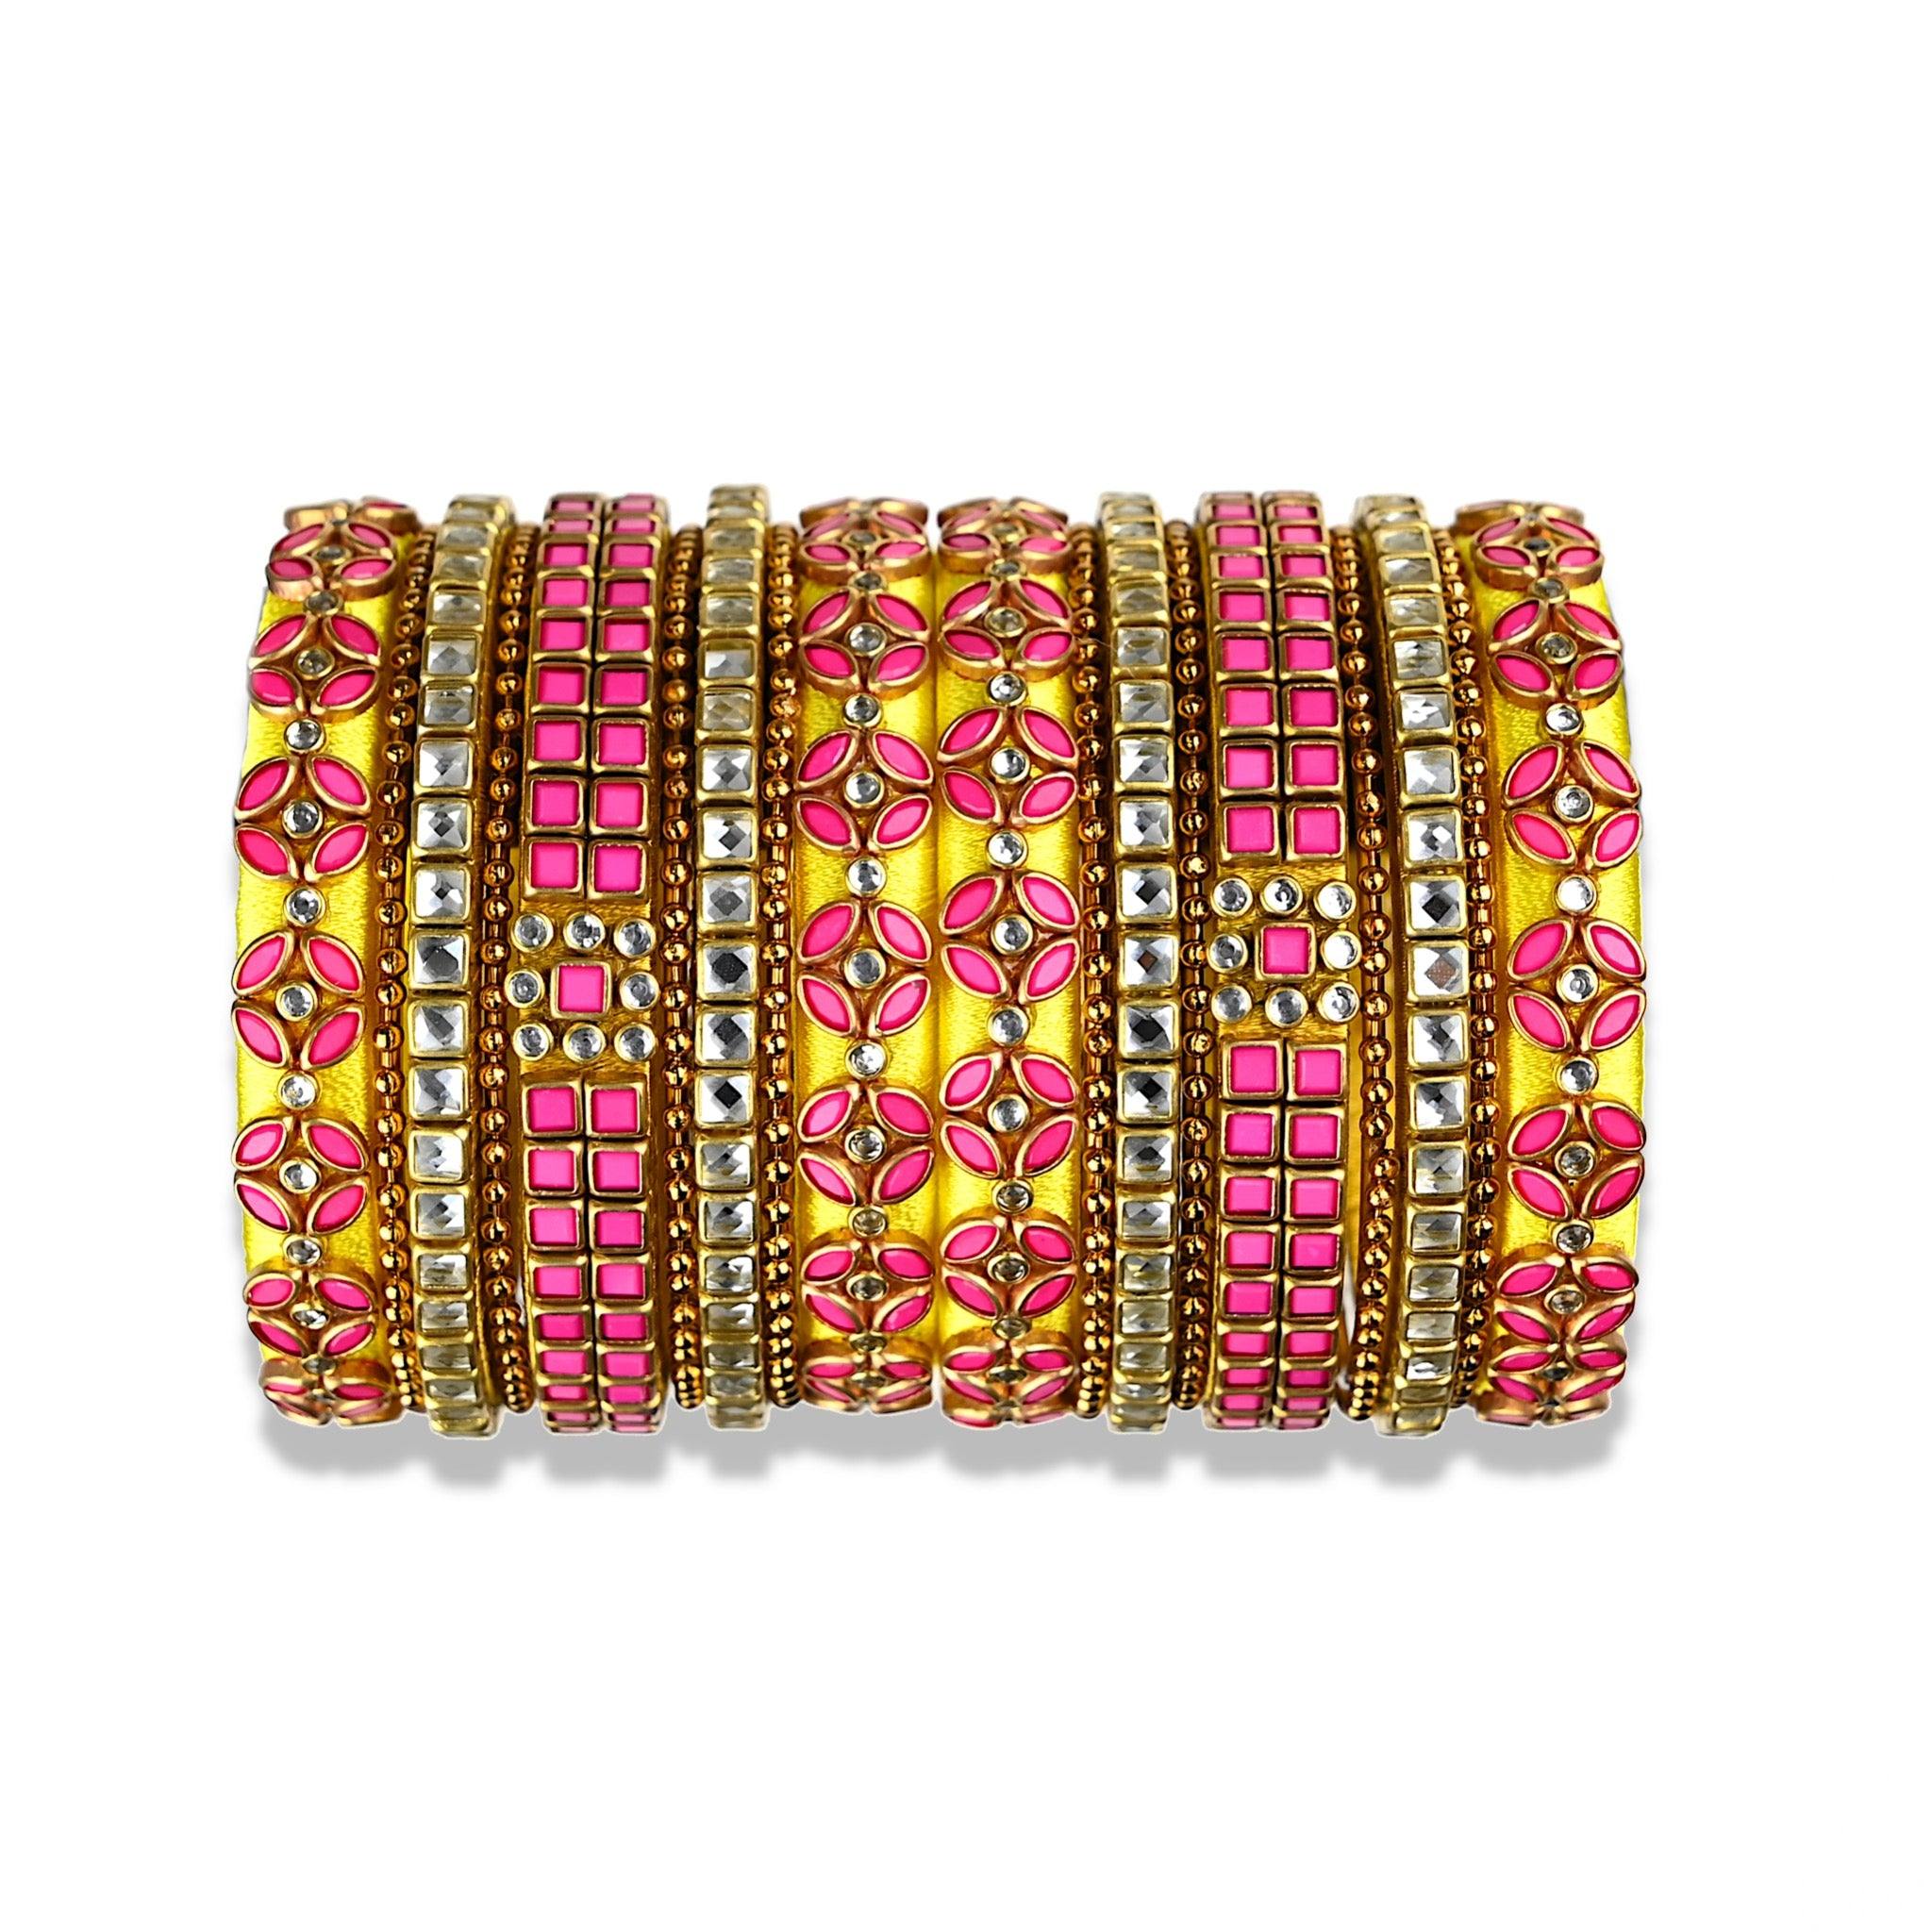 Beautiful Customized Handmade Silk Thread Bangles for All Occasions